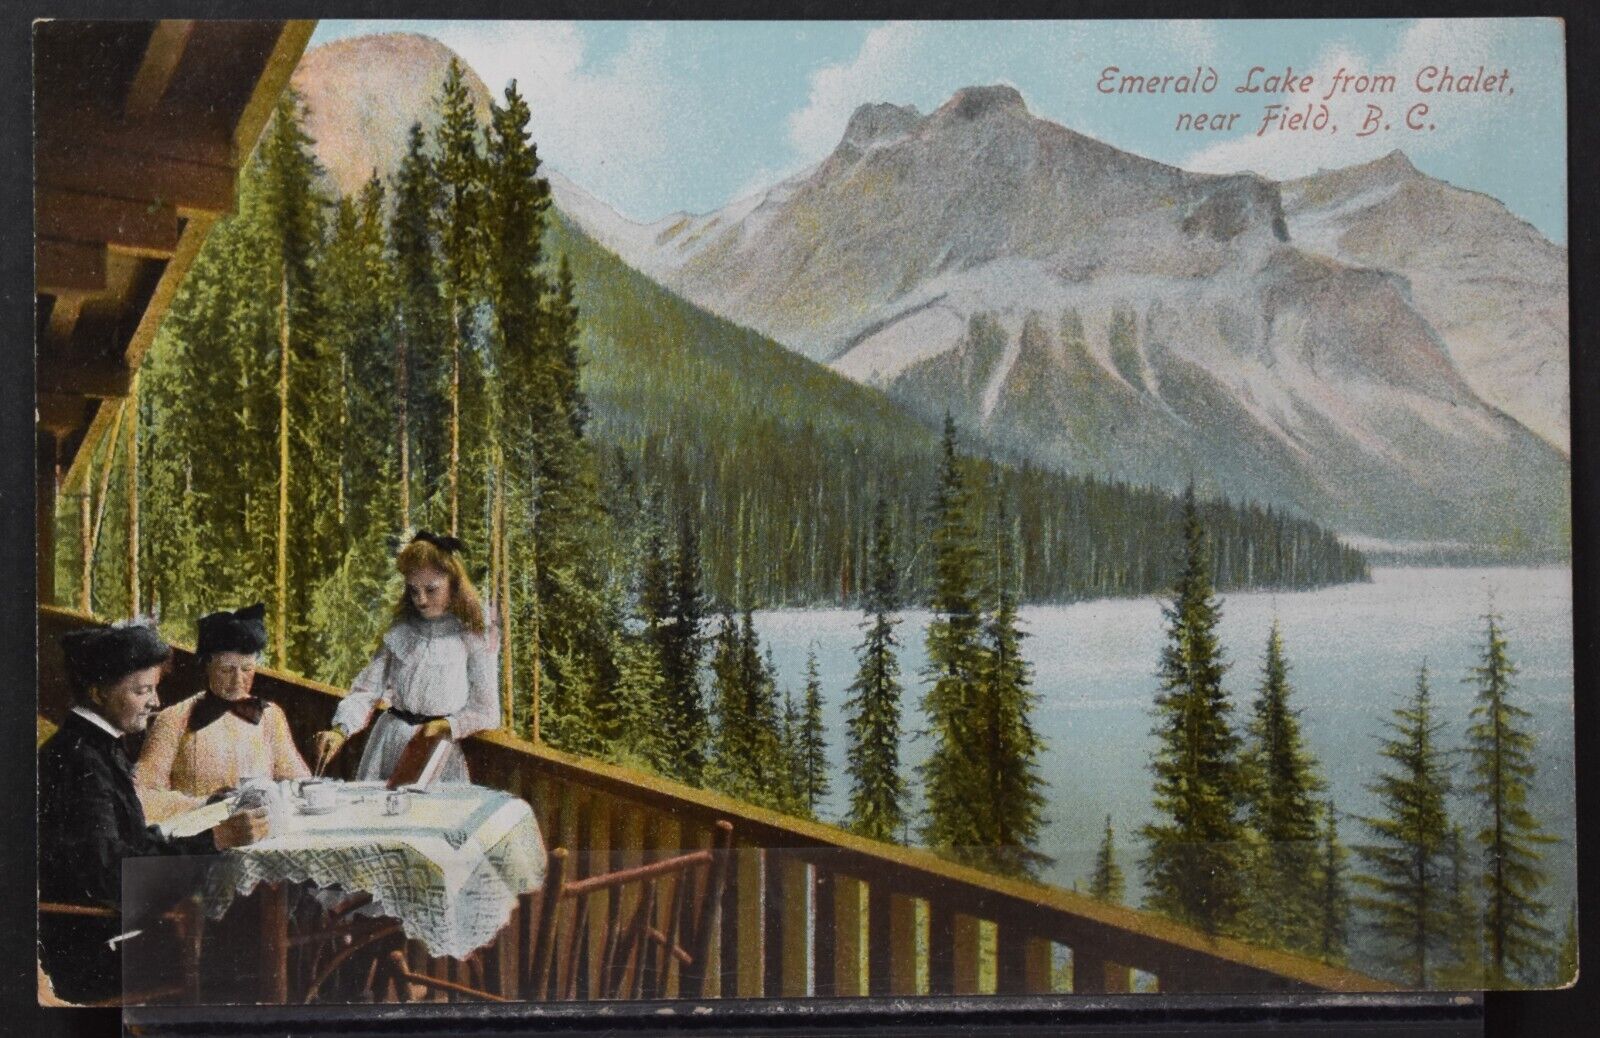 Field, BC, Canada - Emerald Lake from Chalet - Early 1900s